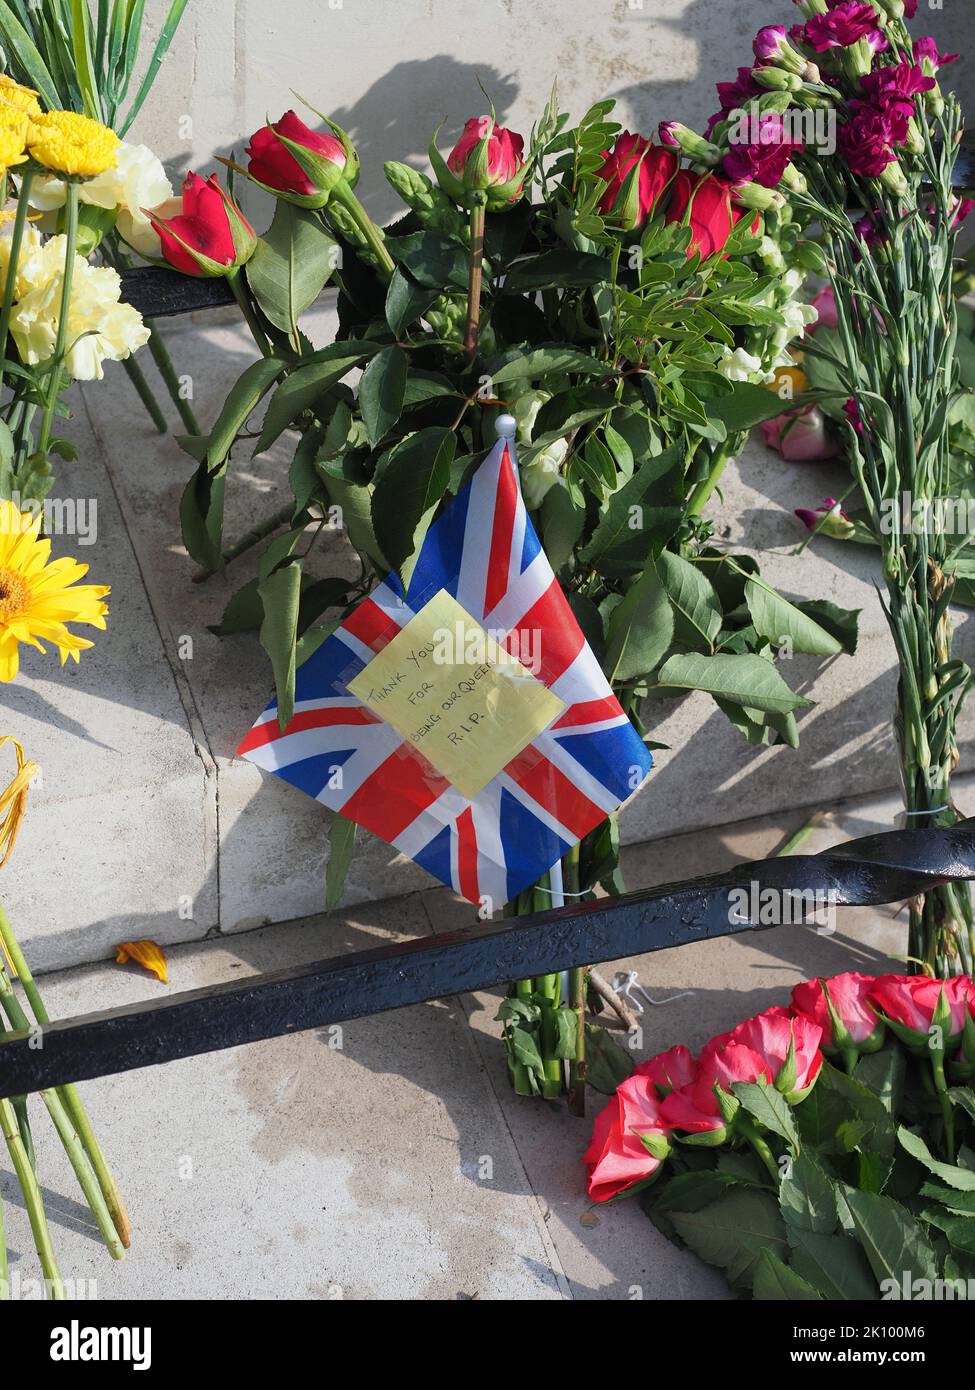 Sheerness, Kent, UK. 14th Sep, 2022. Floral tributes to Queen Elizabeth II seen at the war memorial in Sheerness, Kent. Credit: James Bell/Alamy Live News Stock Photo